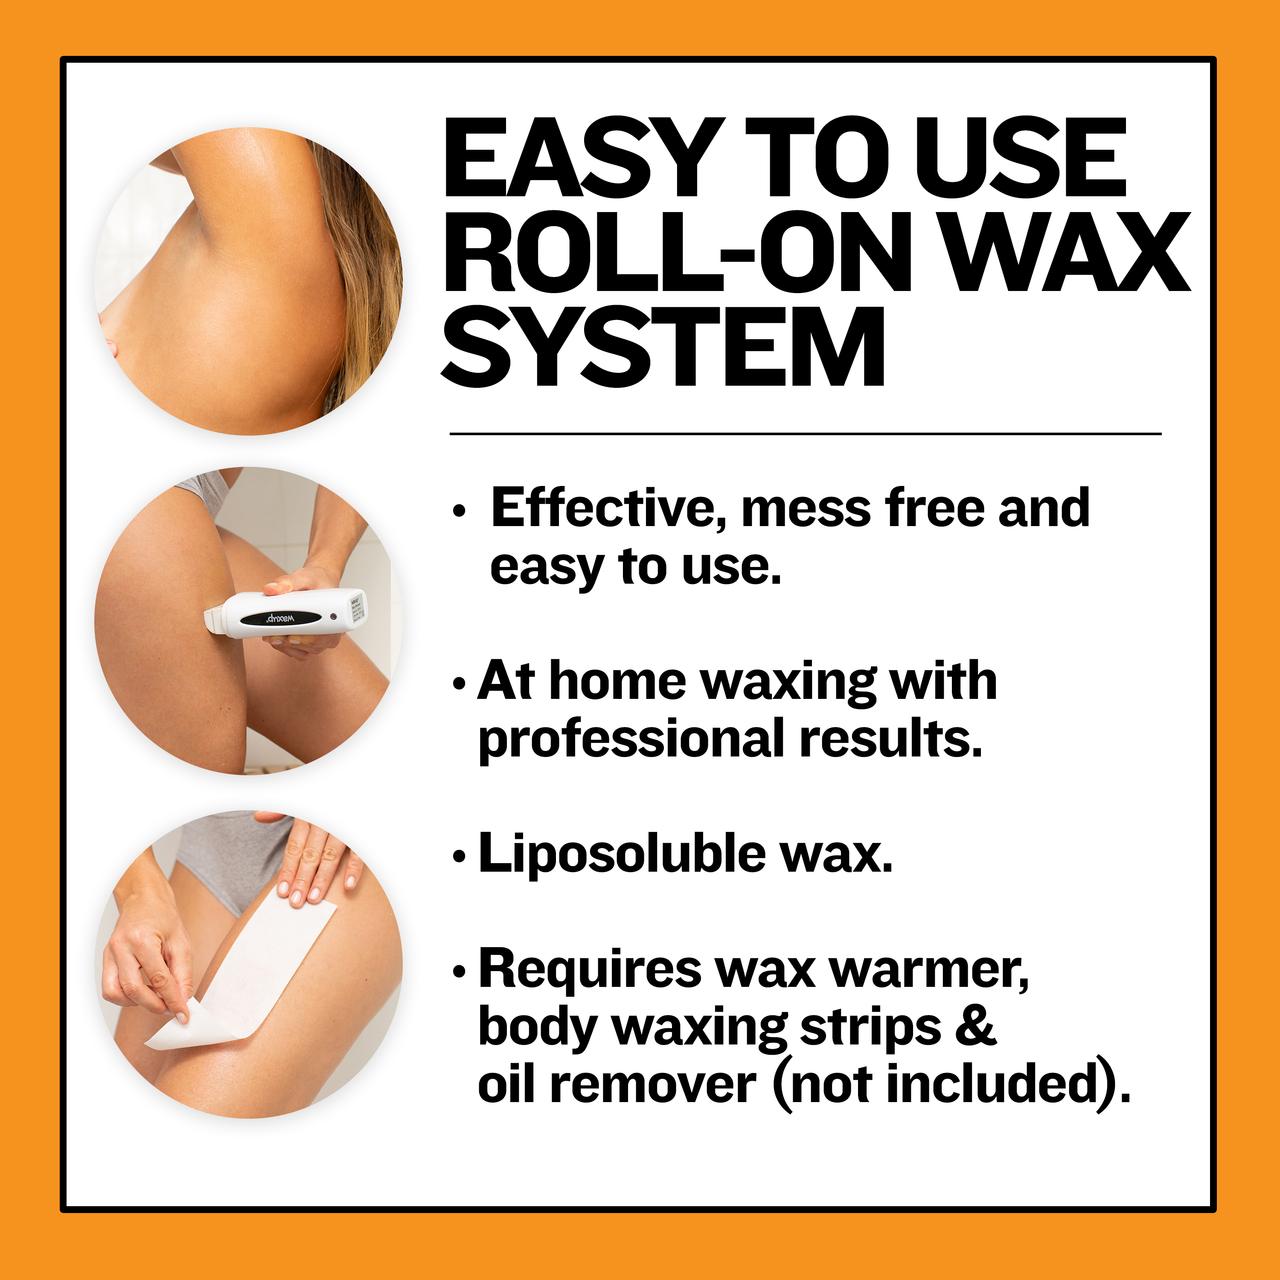 Honey Roll On Wax Cartridges 4 Pack - thatswaxup -  - Roll On Wax - waxup hair removal wax body waxing kit women and men professional waxing supplies